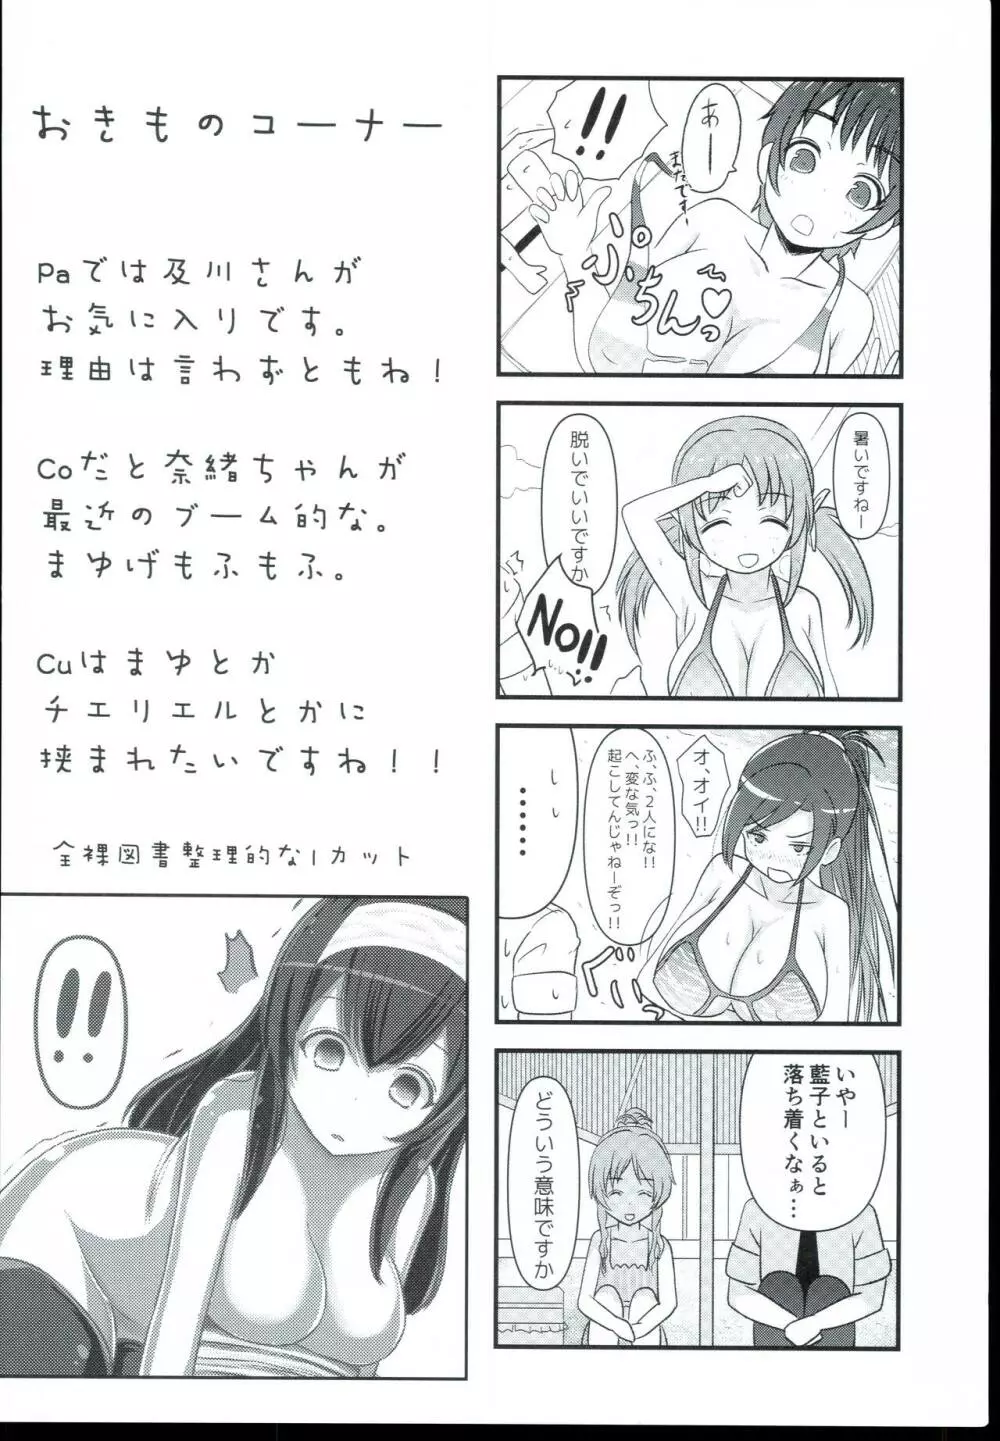 ふみふみ？ふみふみ。ふみふみ…ふみふみ!! - page6